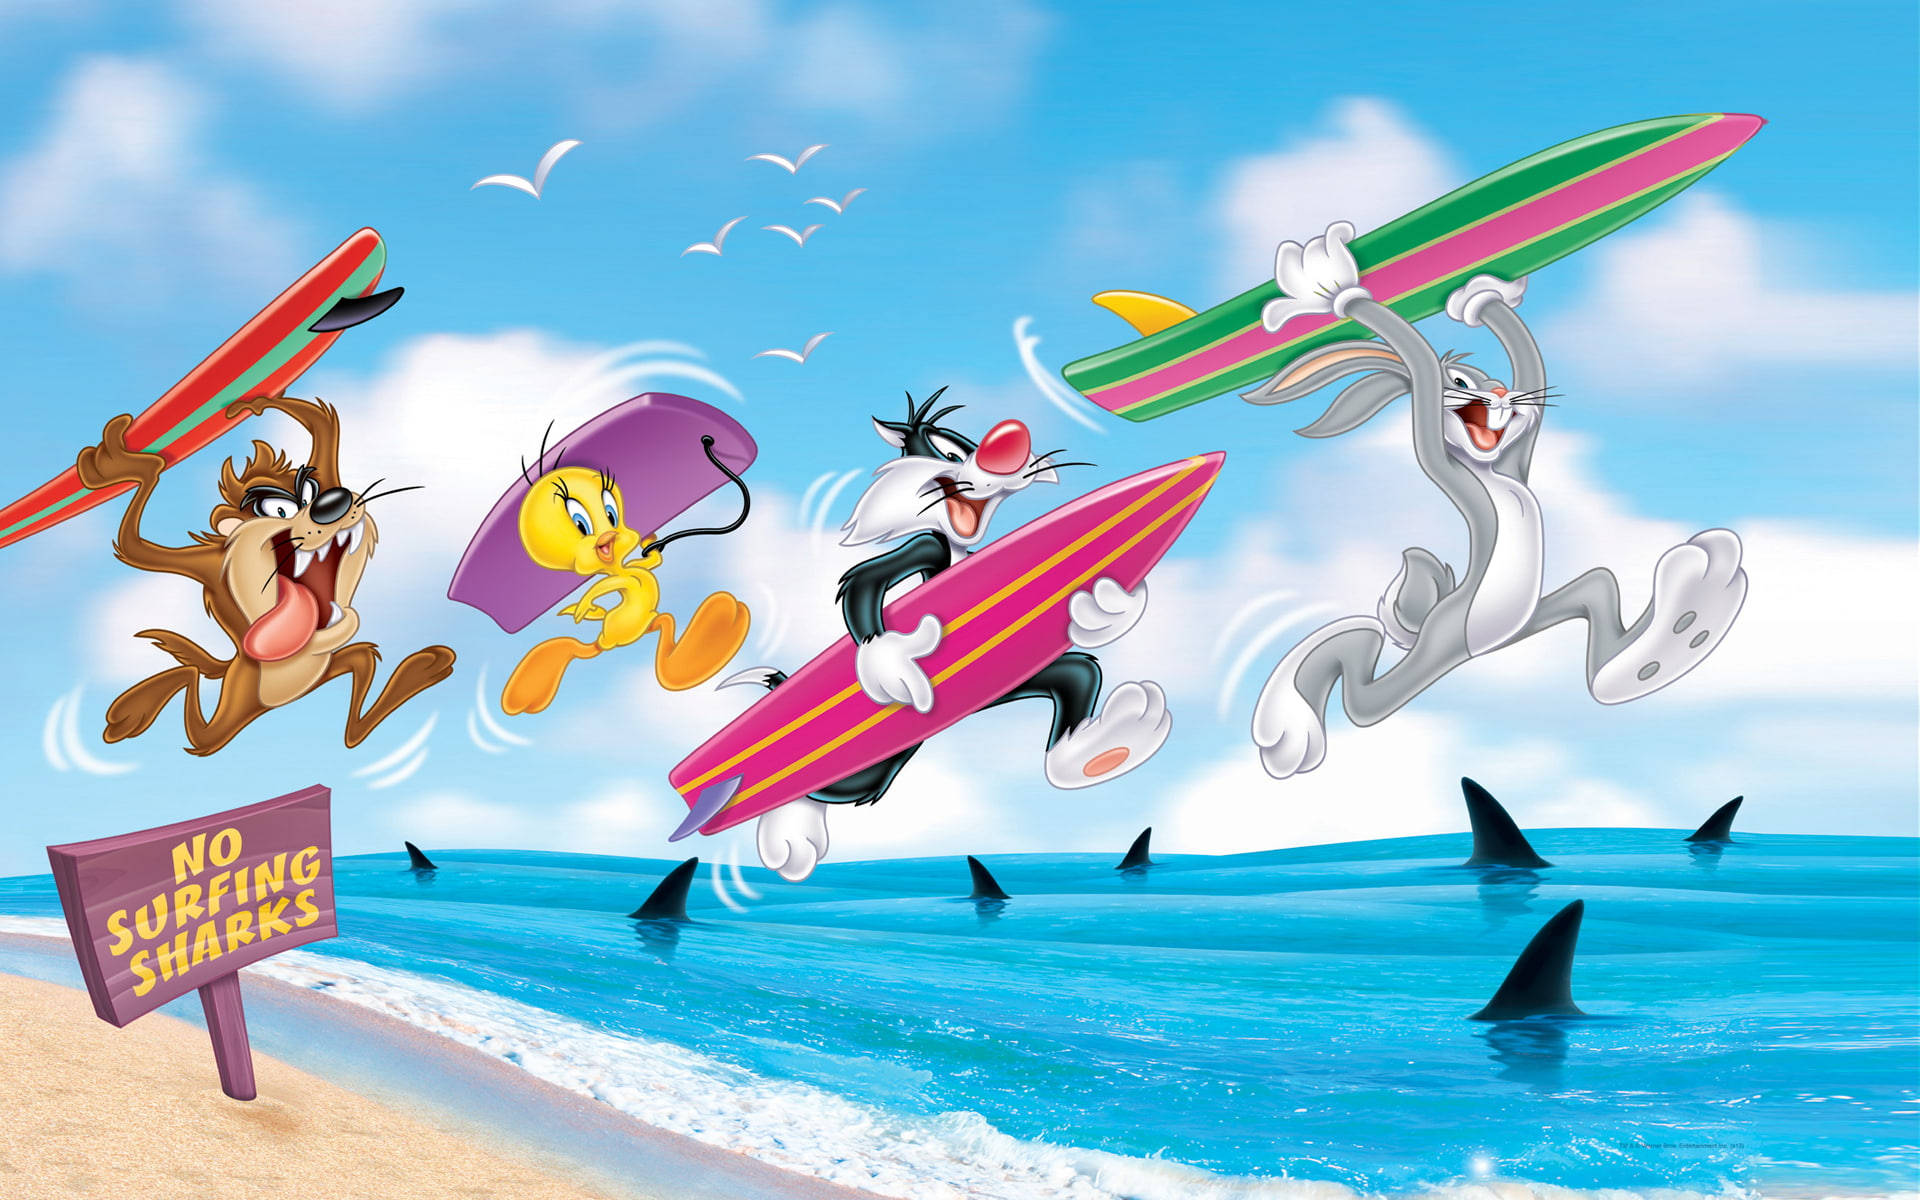 Looney Tunes Surfing With Sharks Wallpaper